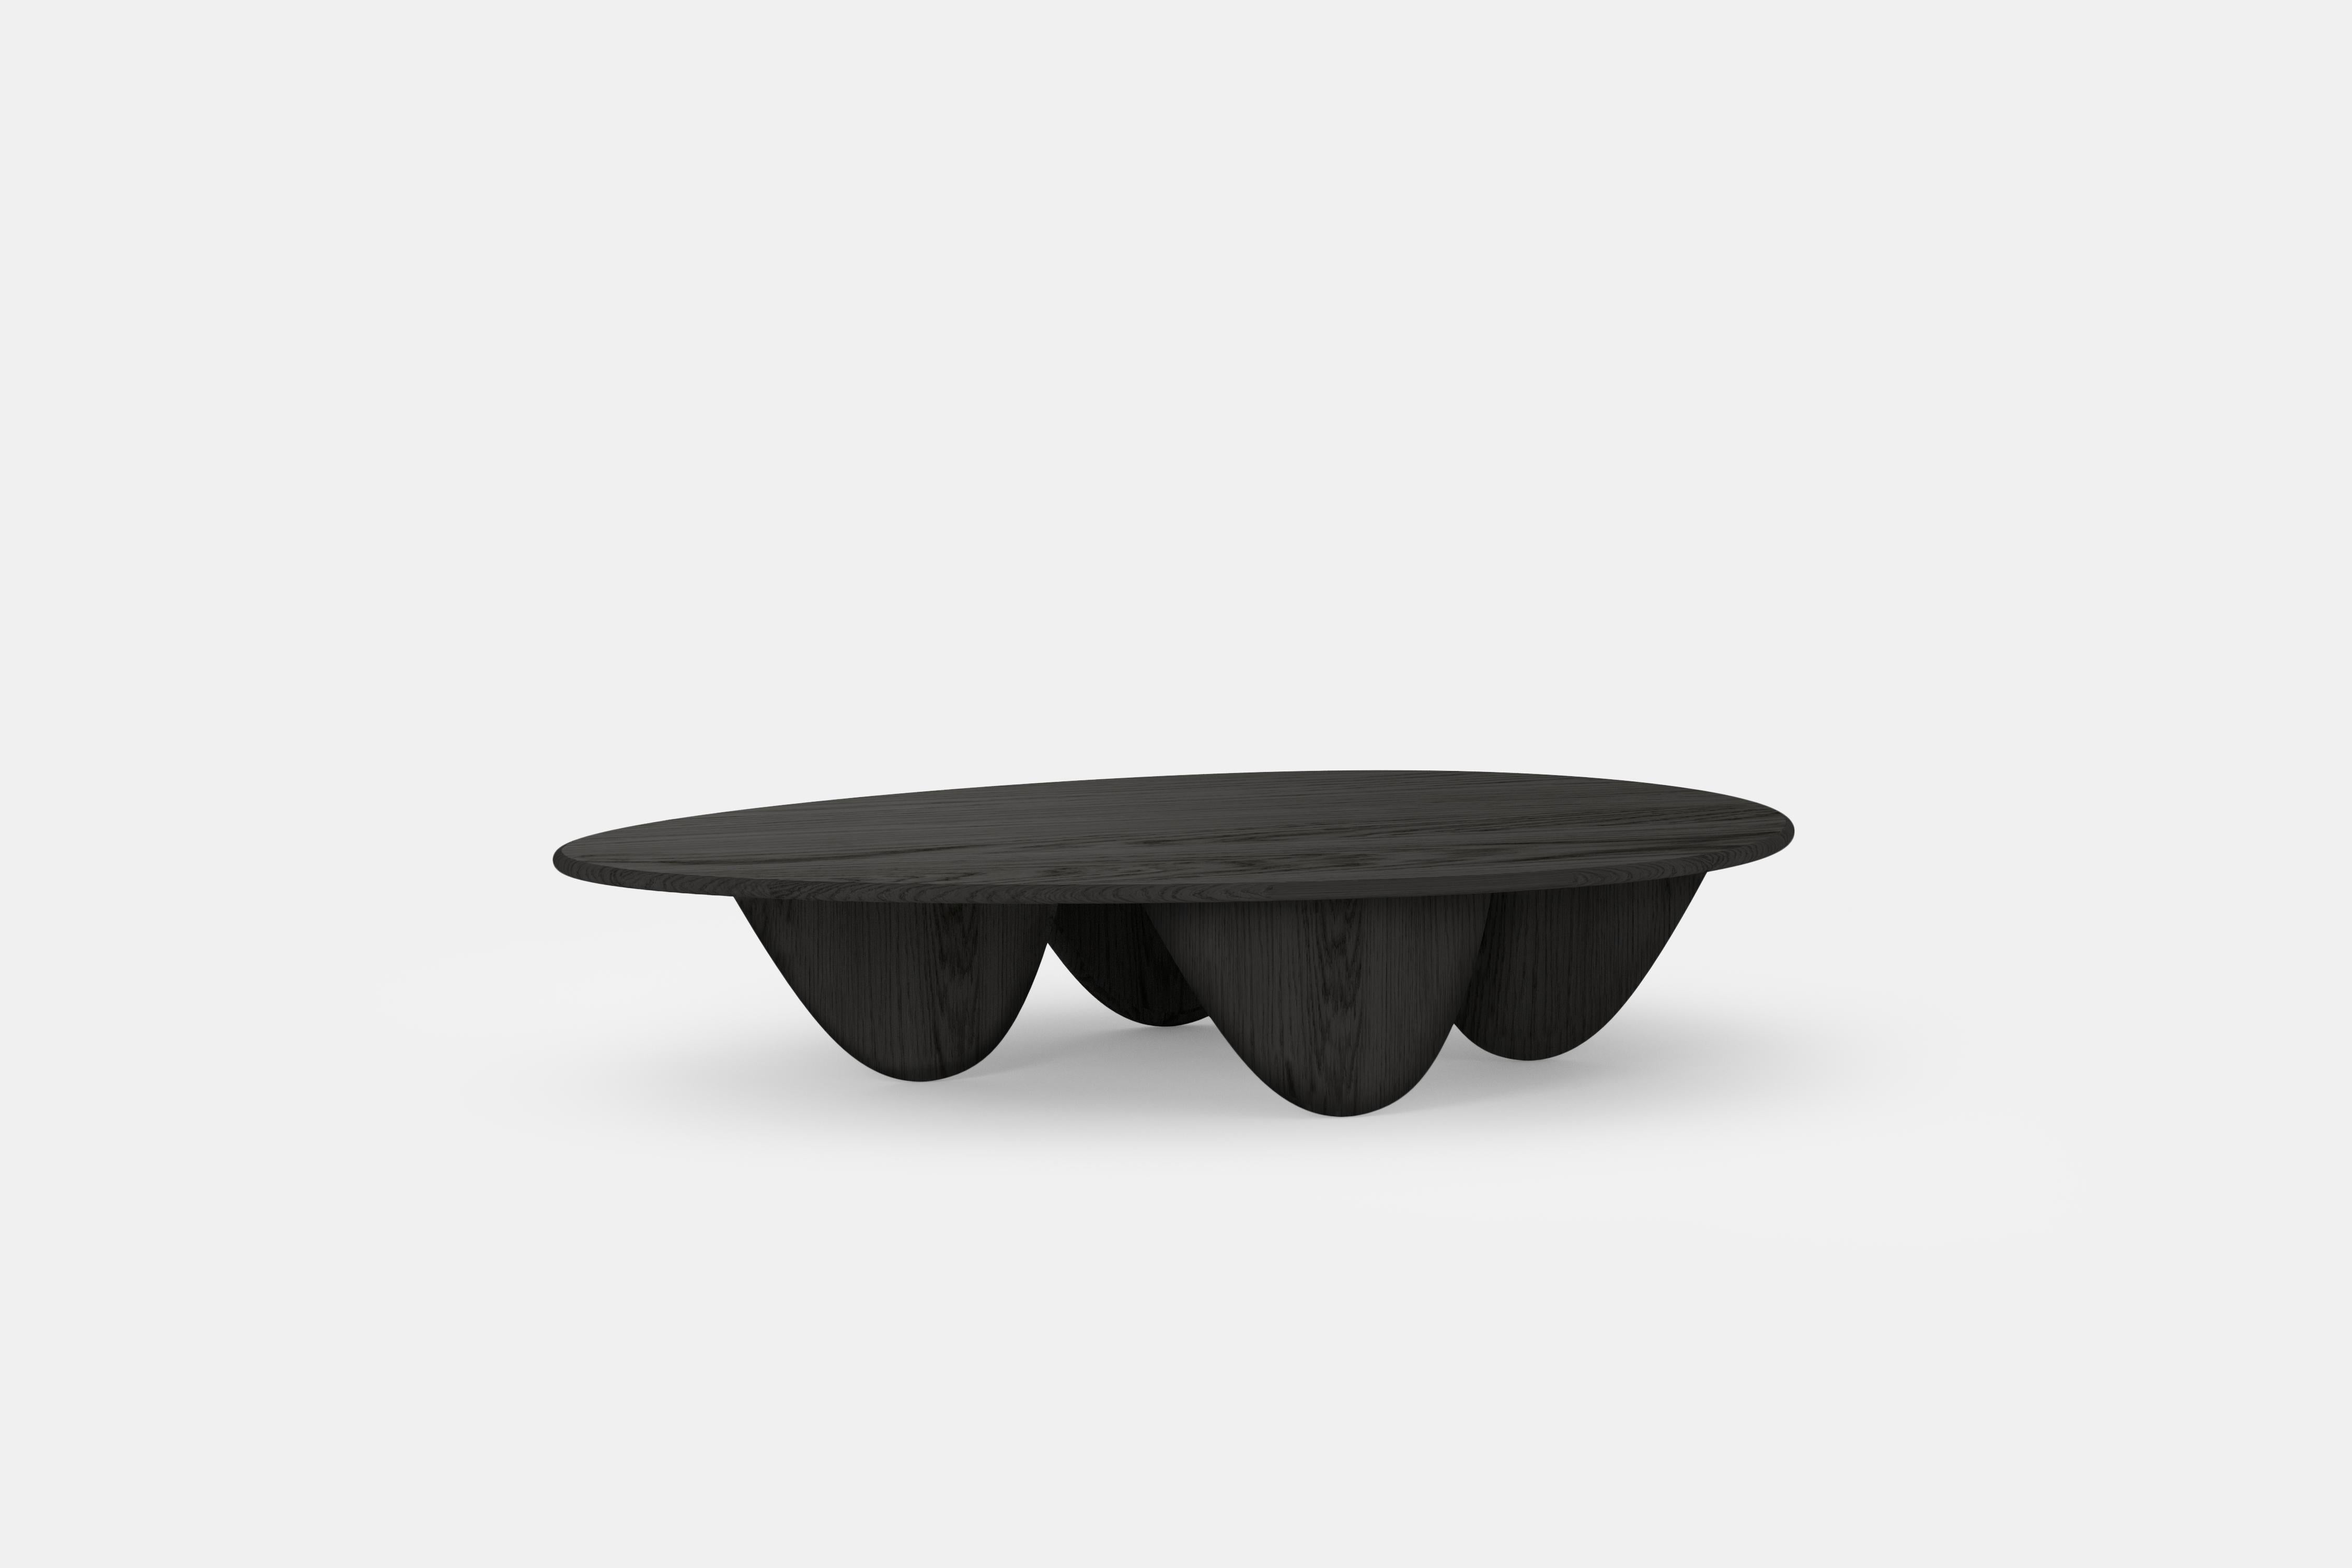 Contemporary Noviembre X Big Coffee Table in Burned Oak Wood, Coffee Table by Joel Escalona For Sale